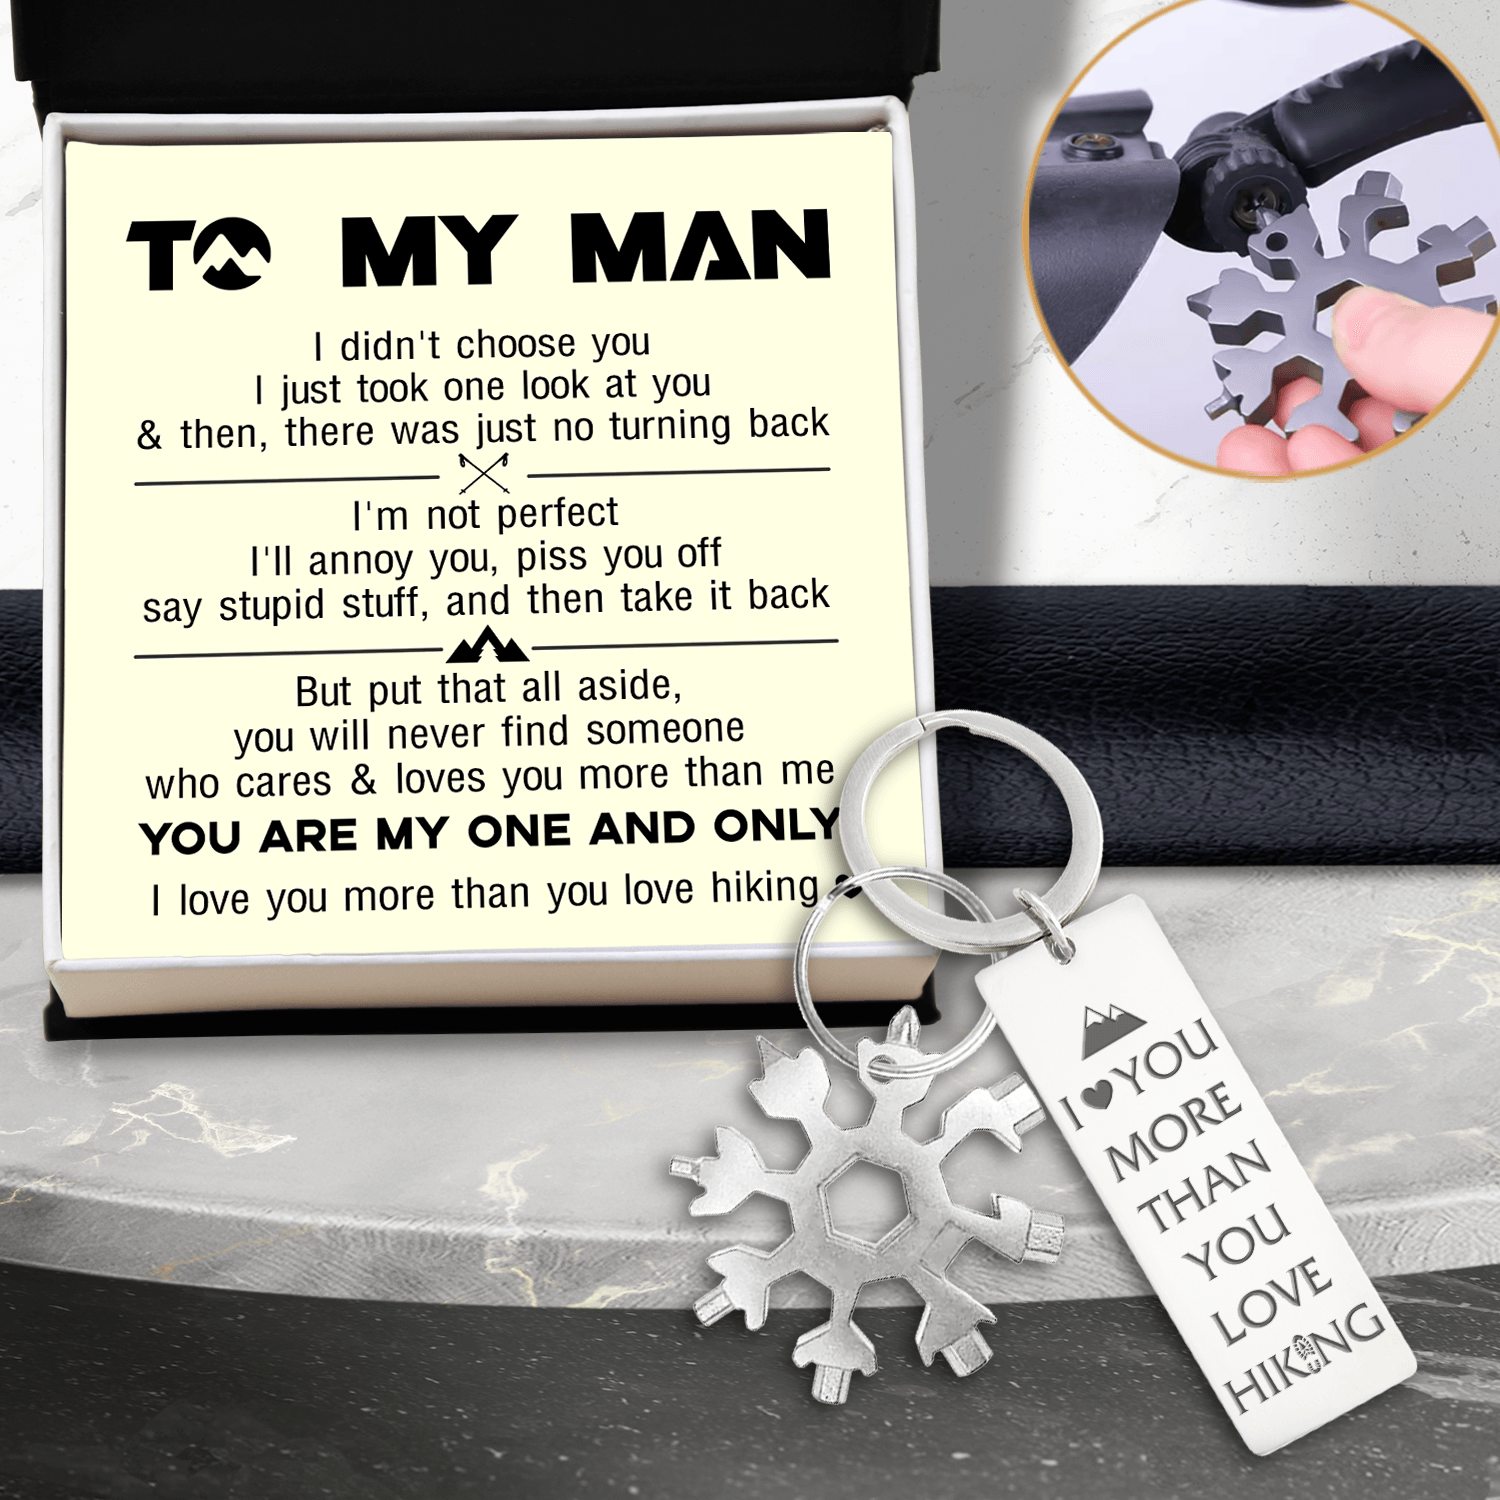 Multitool Keychain - Hiking - To My Man - You Are My One And Only - Augktb26008 - Gifts Holder